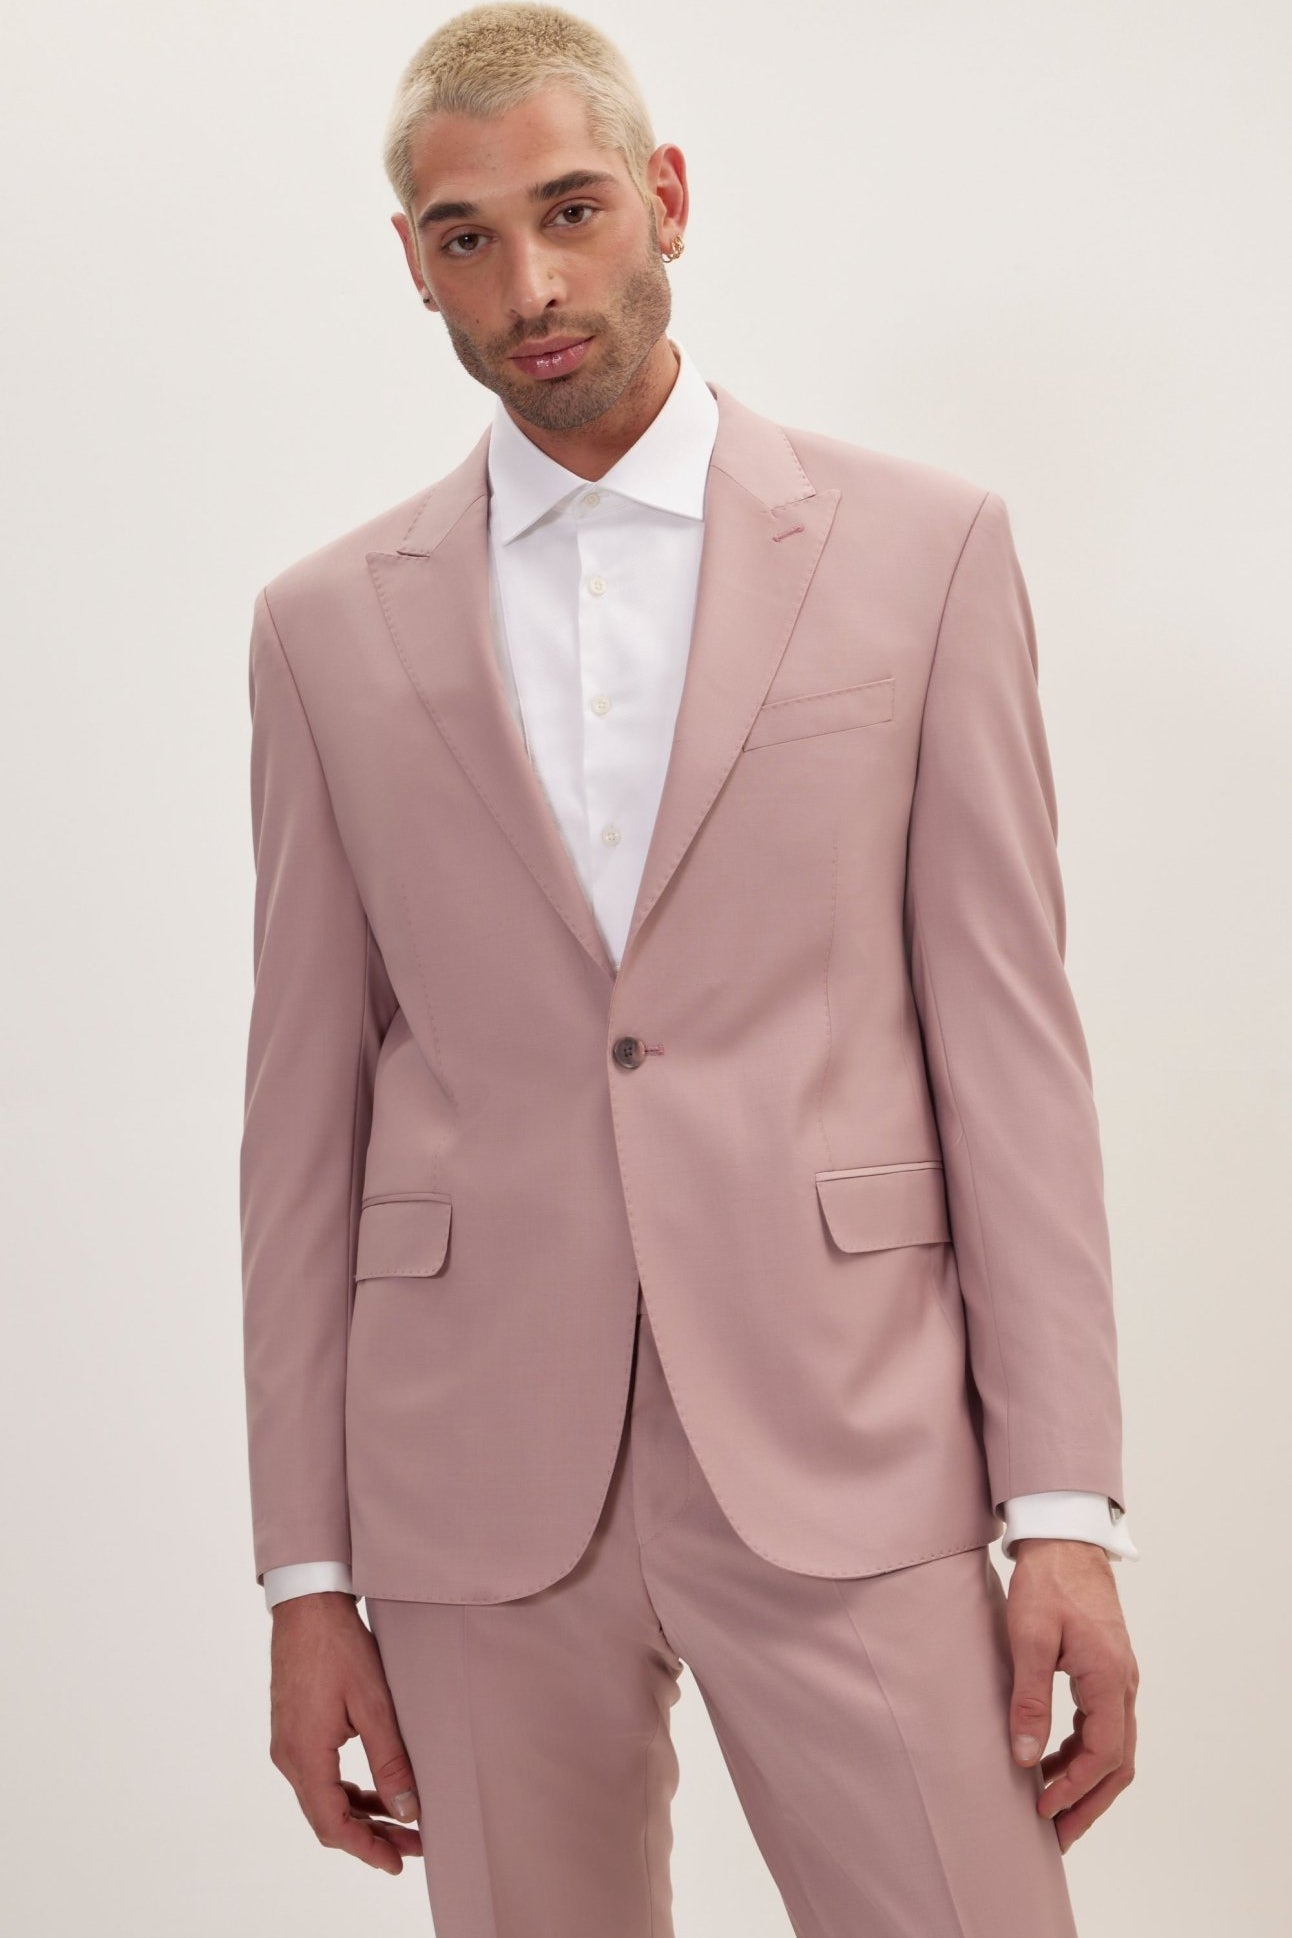 Super 120S Merino Wool Single Breasted Suit - Blush Pink - Ron Tomson